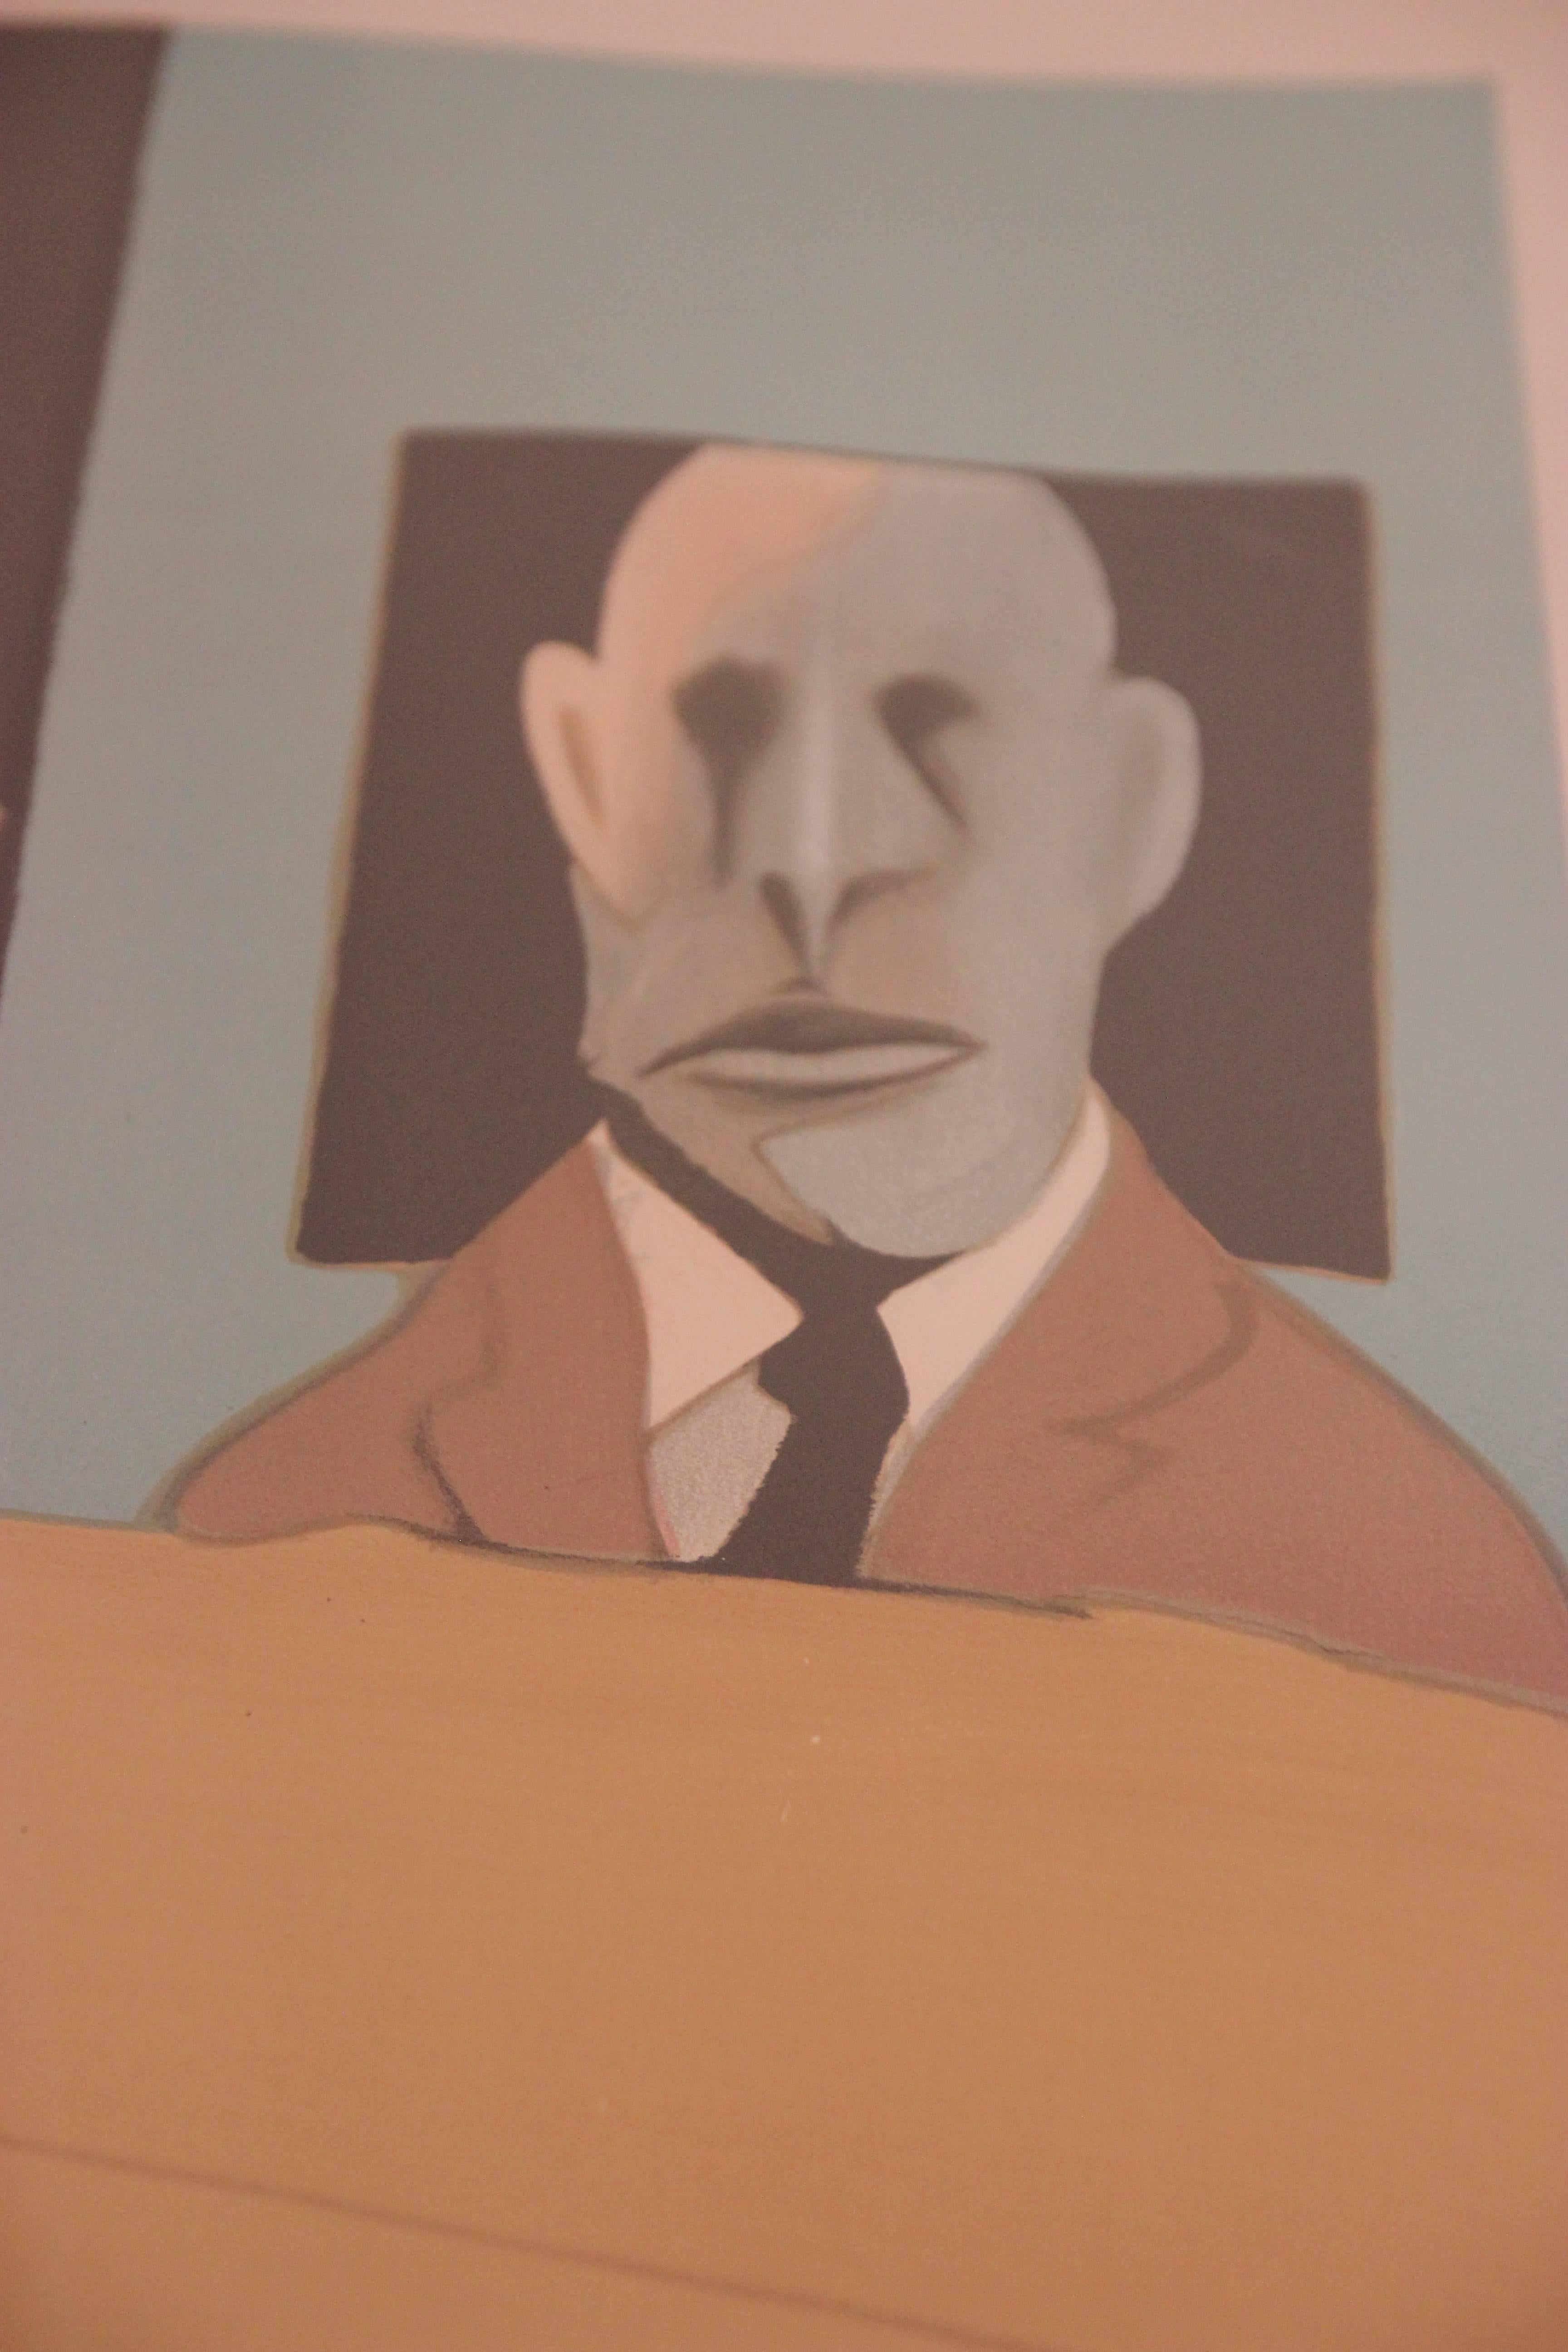 English Francis Bacon Lithograph Poster, Signed and Numbered 91/200